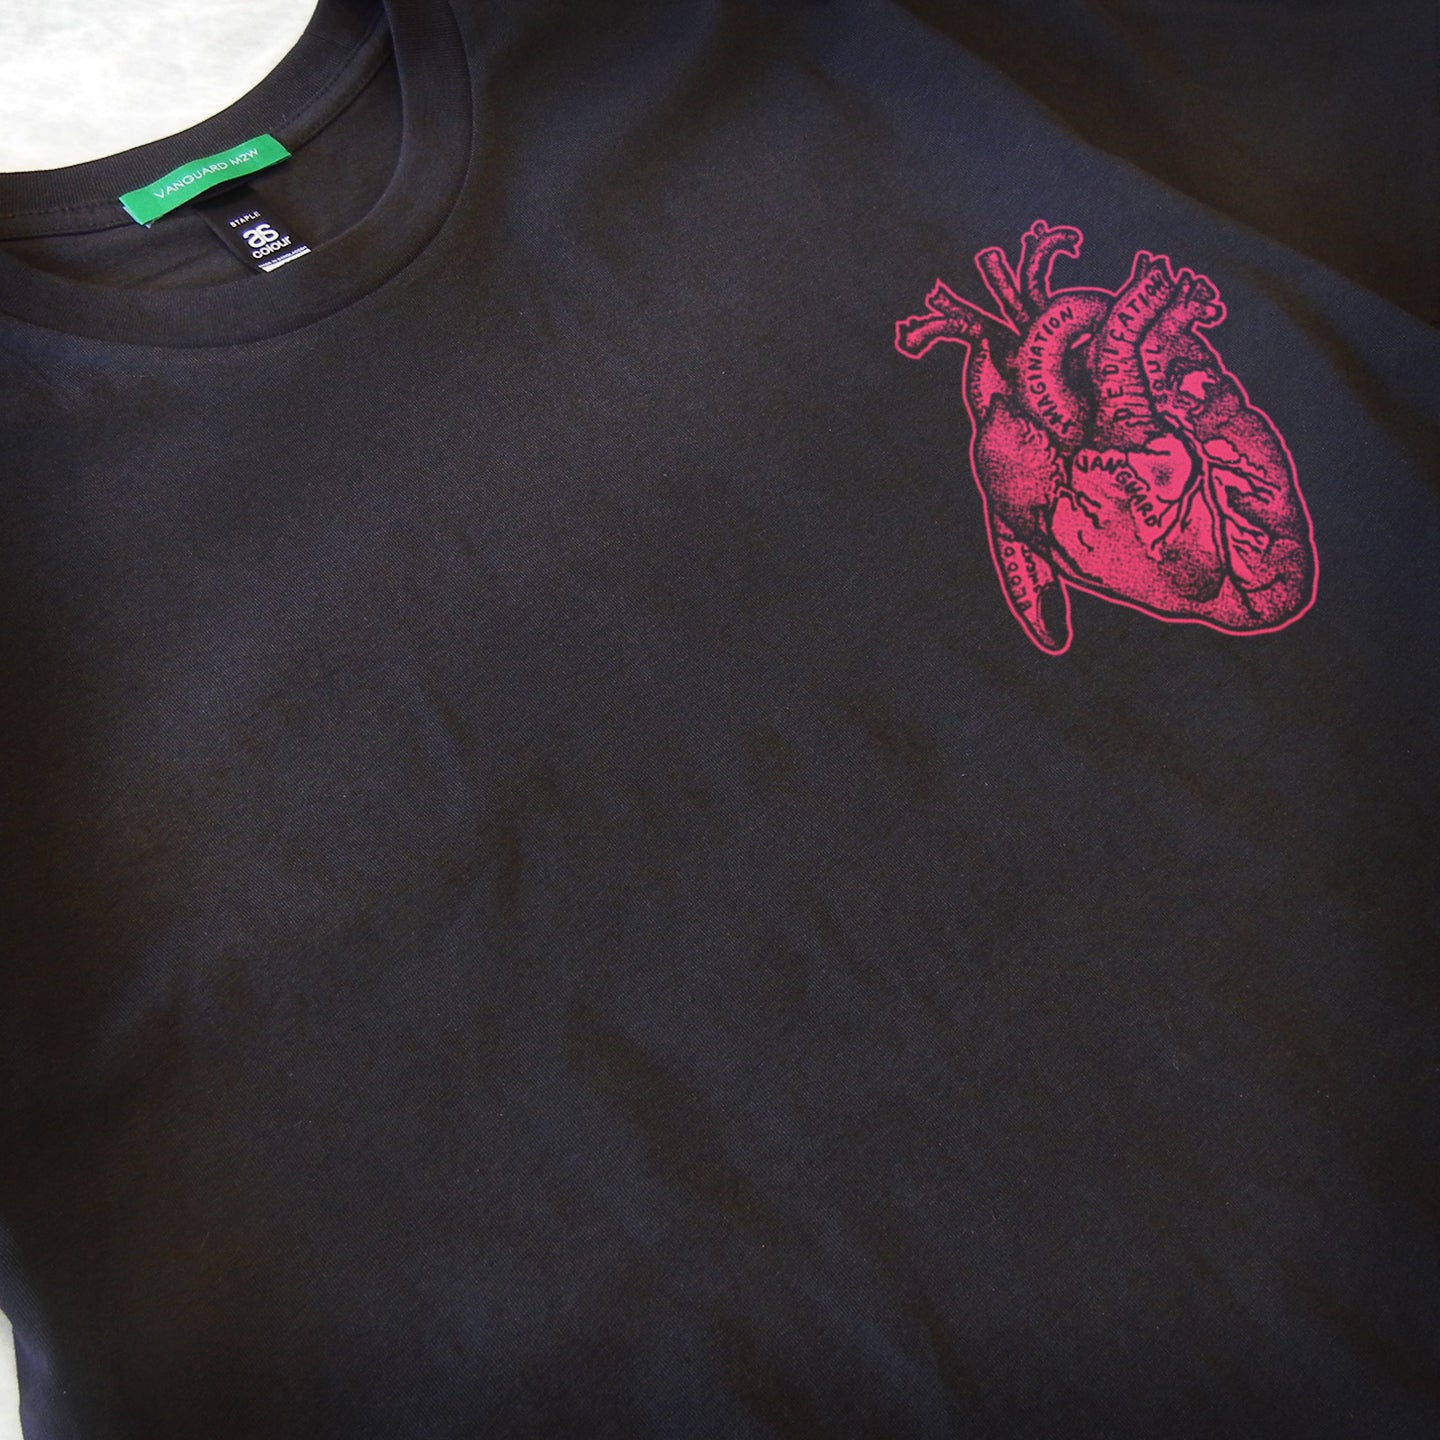 WITH HEART T-Shirt - Black